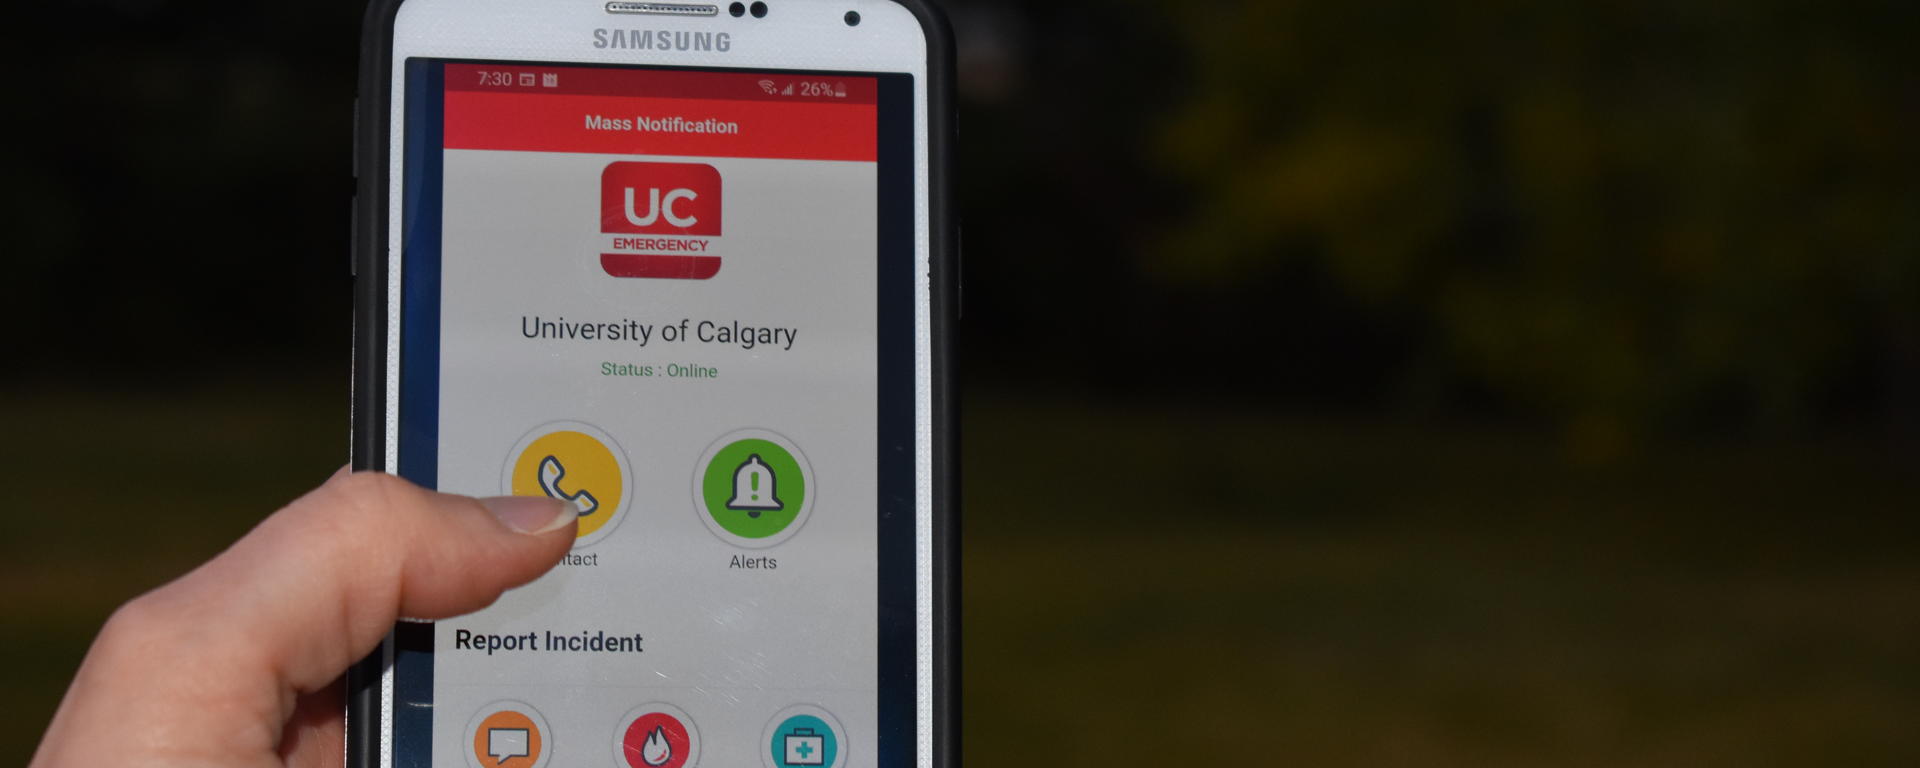 Hand holding phone with UC Emergency Mobile app open